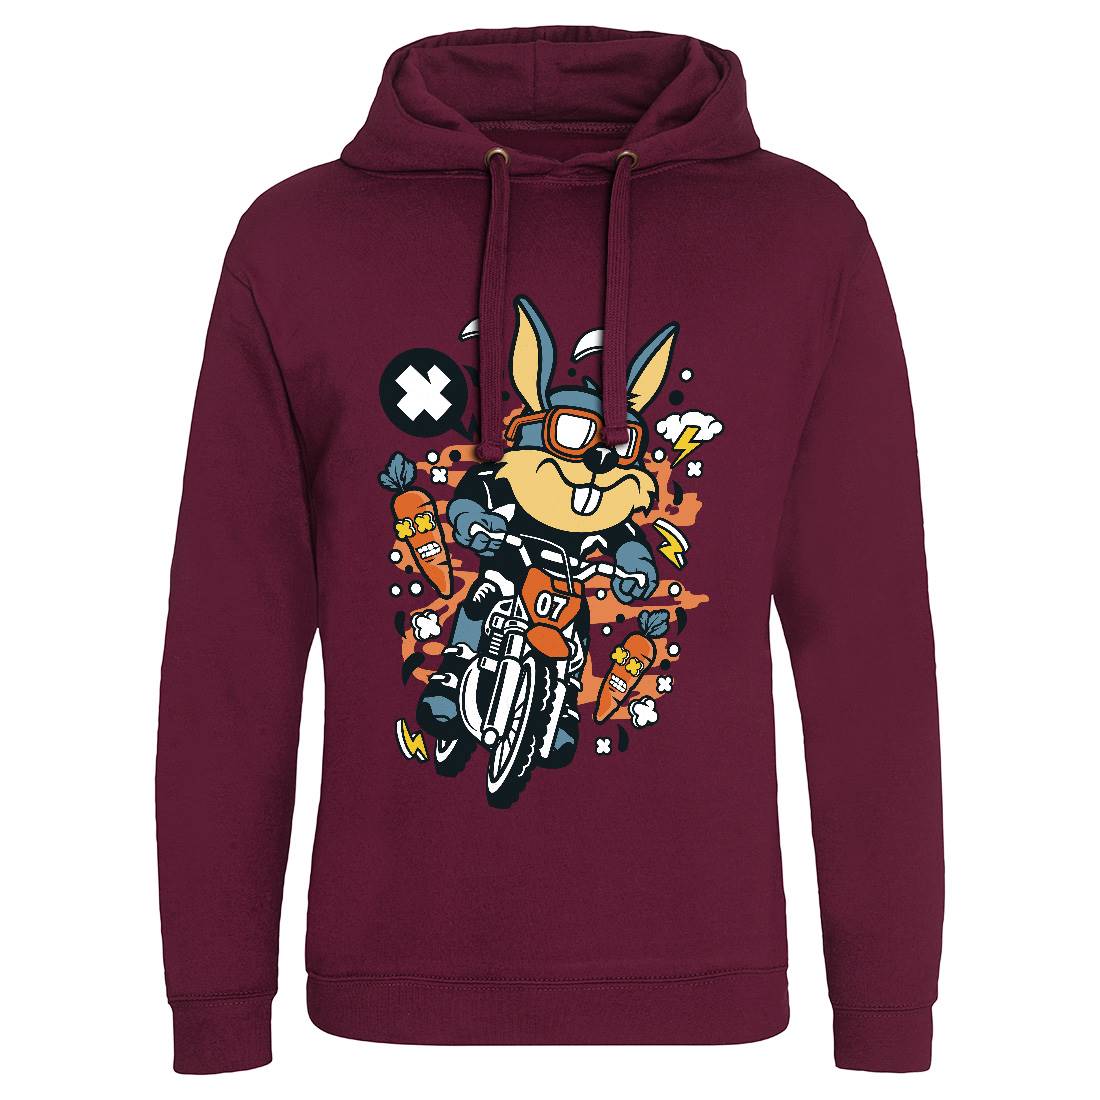 Rabbit Motocross Rider Mens Hoodie Without Pocket Motorcycles C613